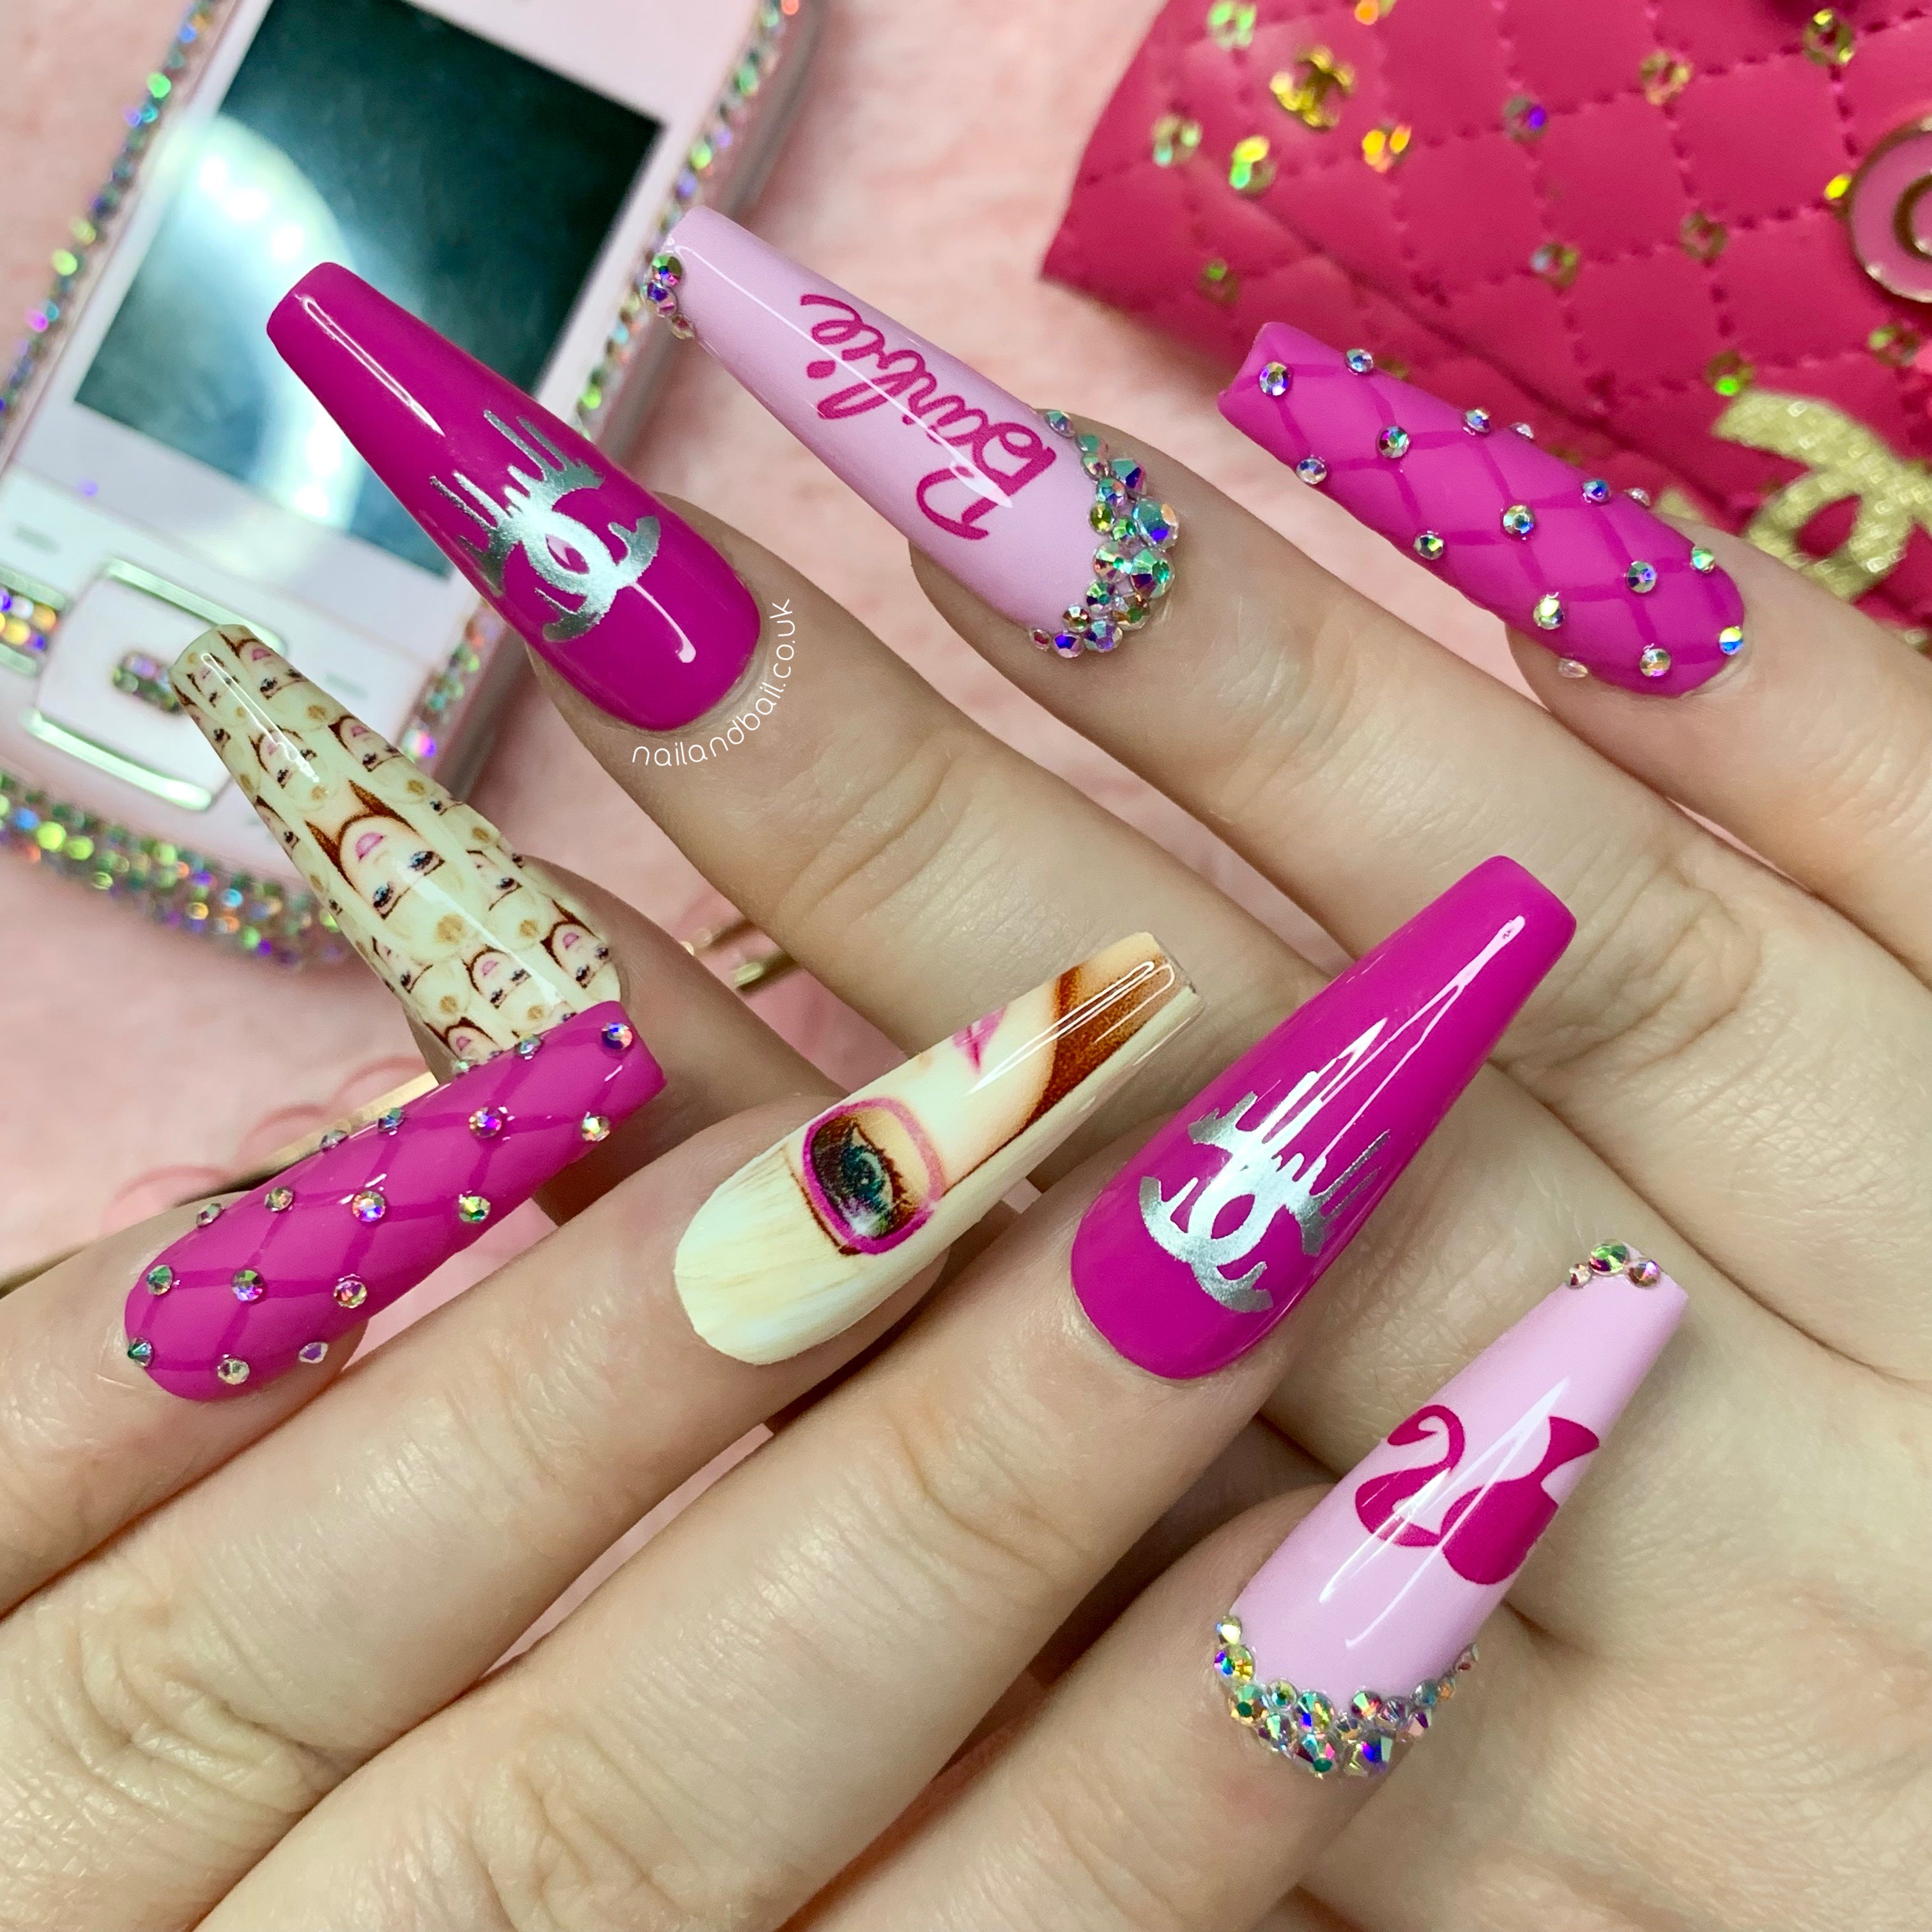 10 Pink Nail Polish Colors to Try If You Want Barbie Nails